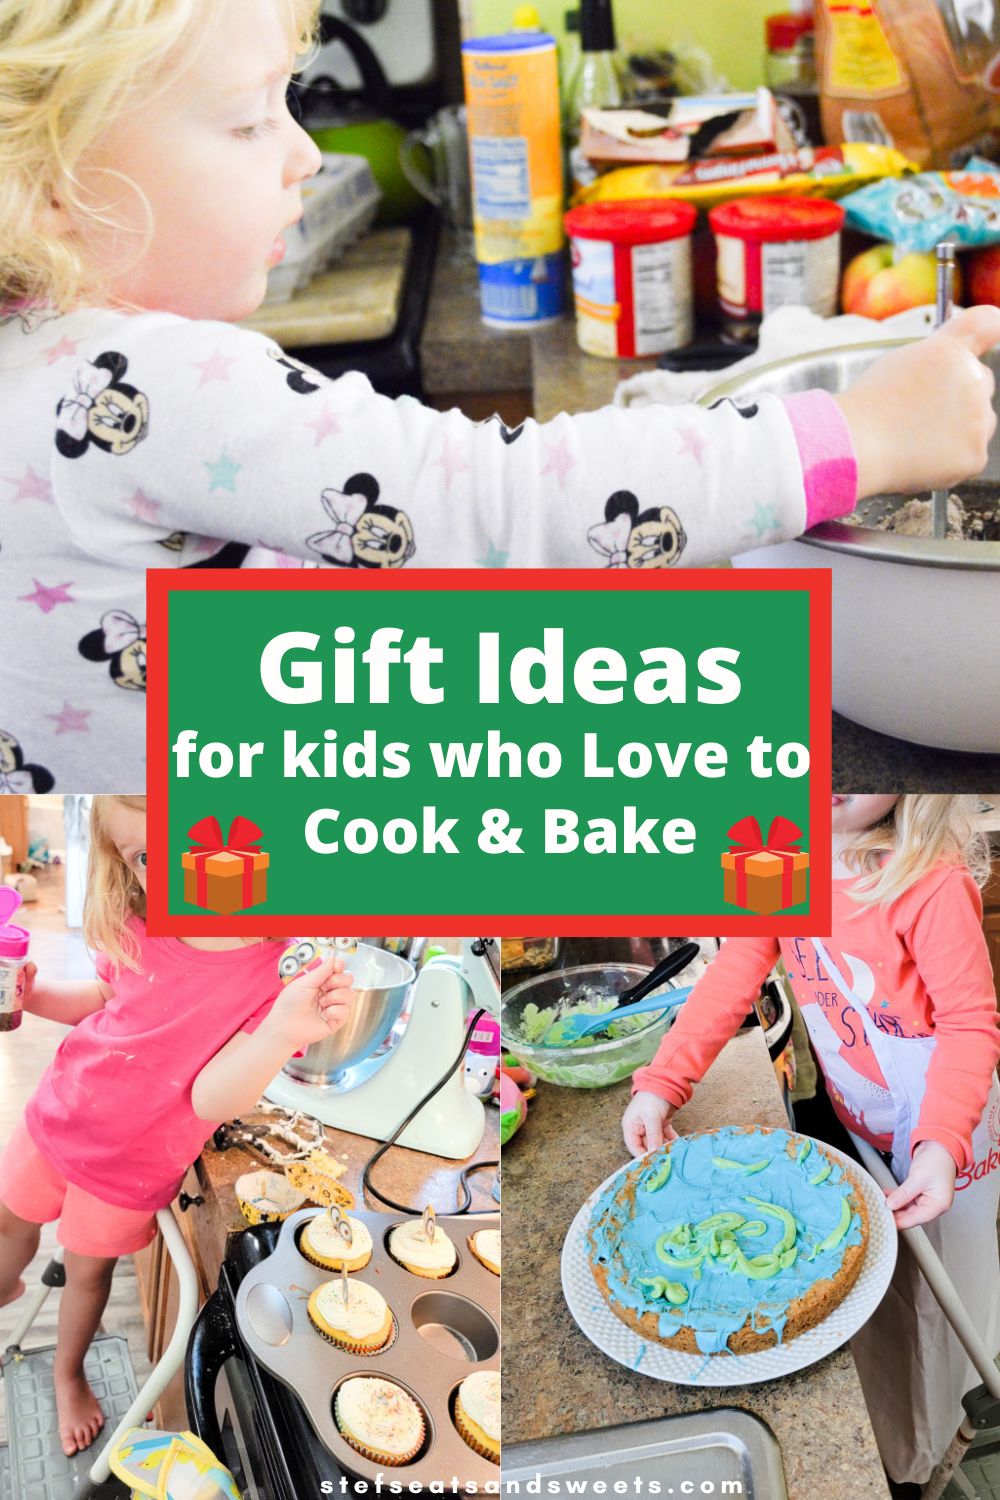 https://stefseatsandsweets.com/wp-content/uploads/2022/11/gift-ideas-for-kids-who-love-to-cook-and-bake.jpg